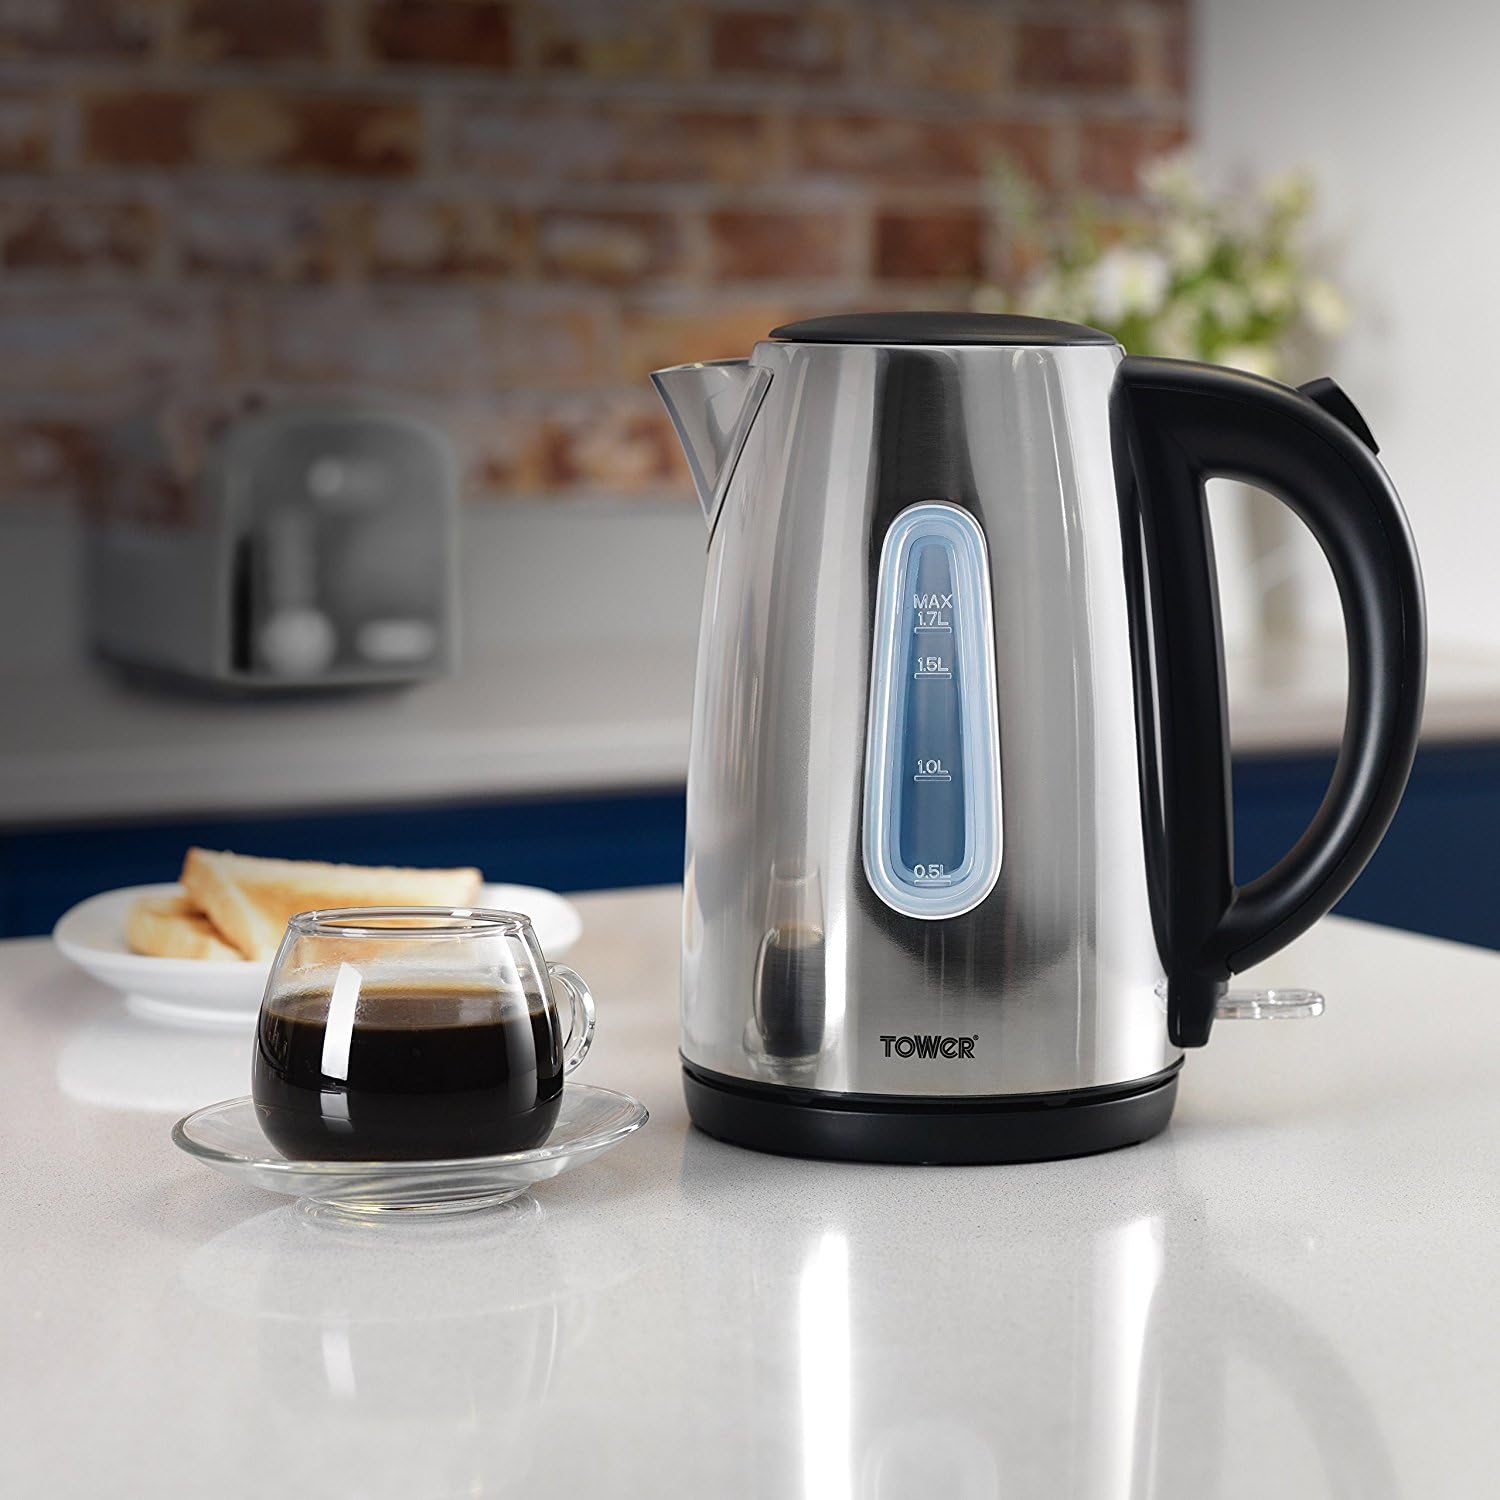 Tower Jug Kettle, Polished Stainless Steel 